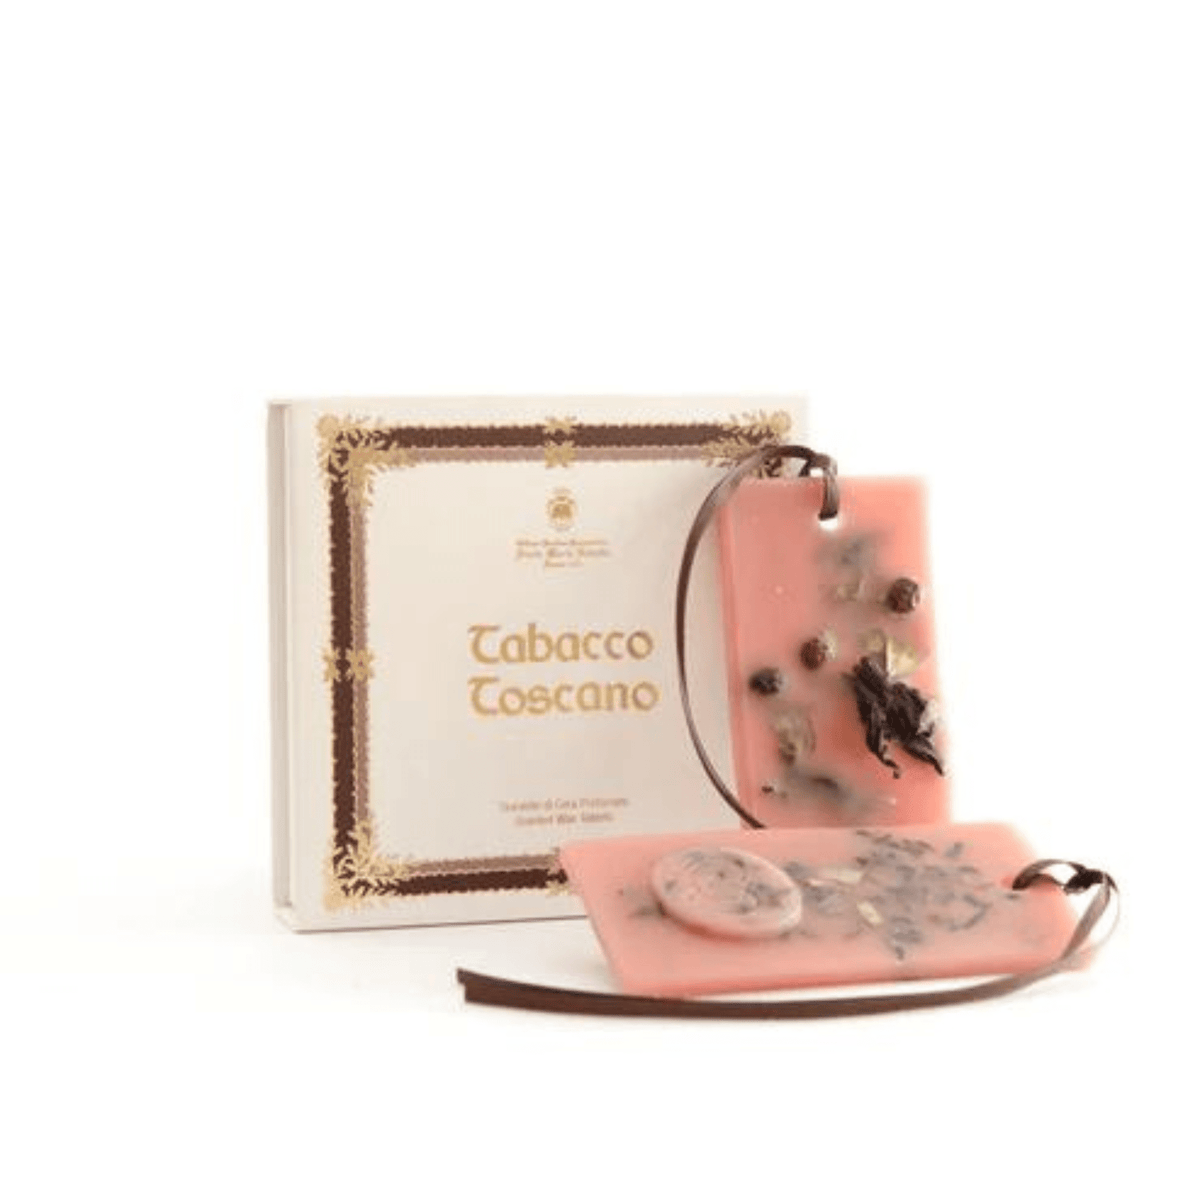 Primary Image of Scented Wax Tablets - Tabacco Toscano